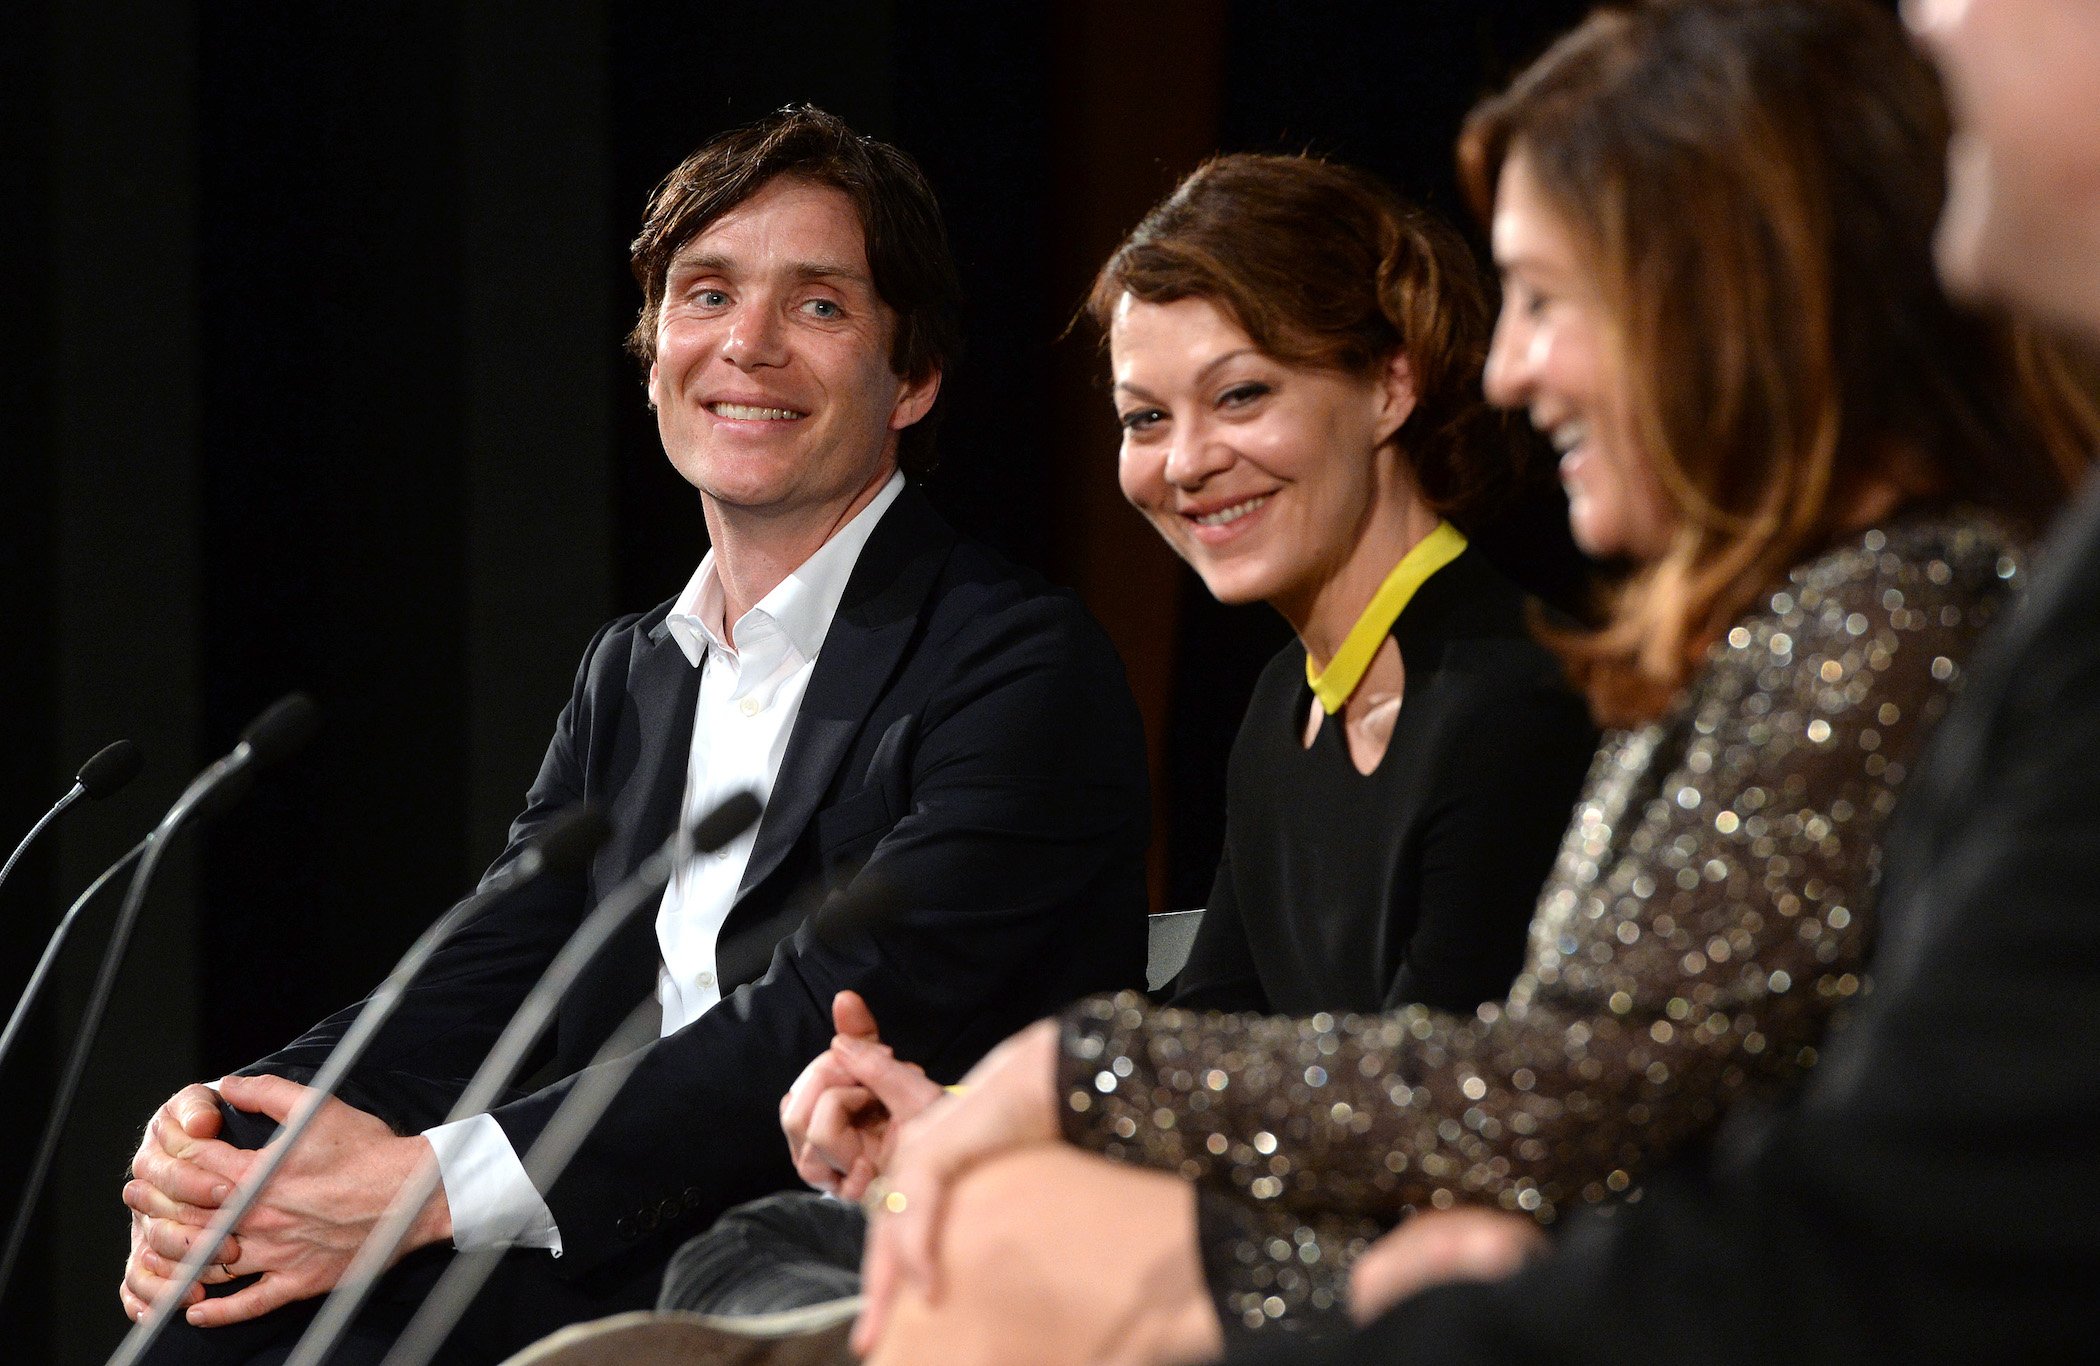 Cillian Murphy and Helen McCrory, two stars of 'Peaky Blinders' Season 6, sitting next to each other and laughing during a Q&A